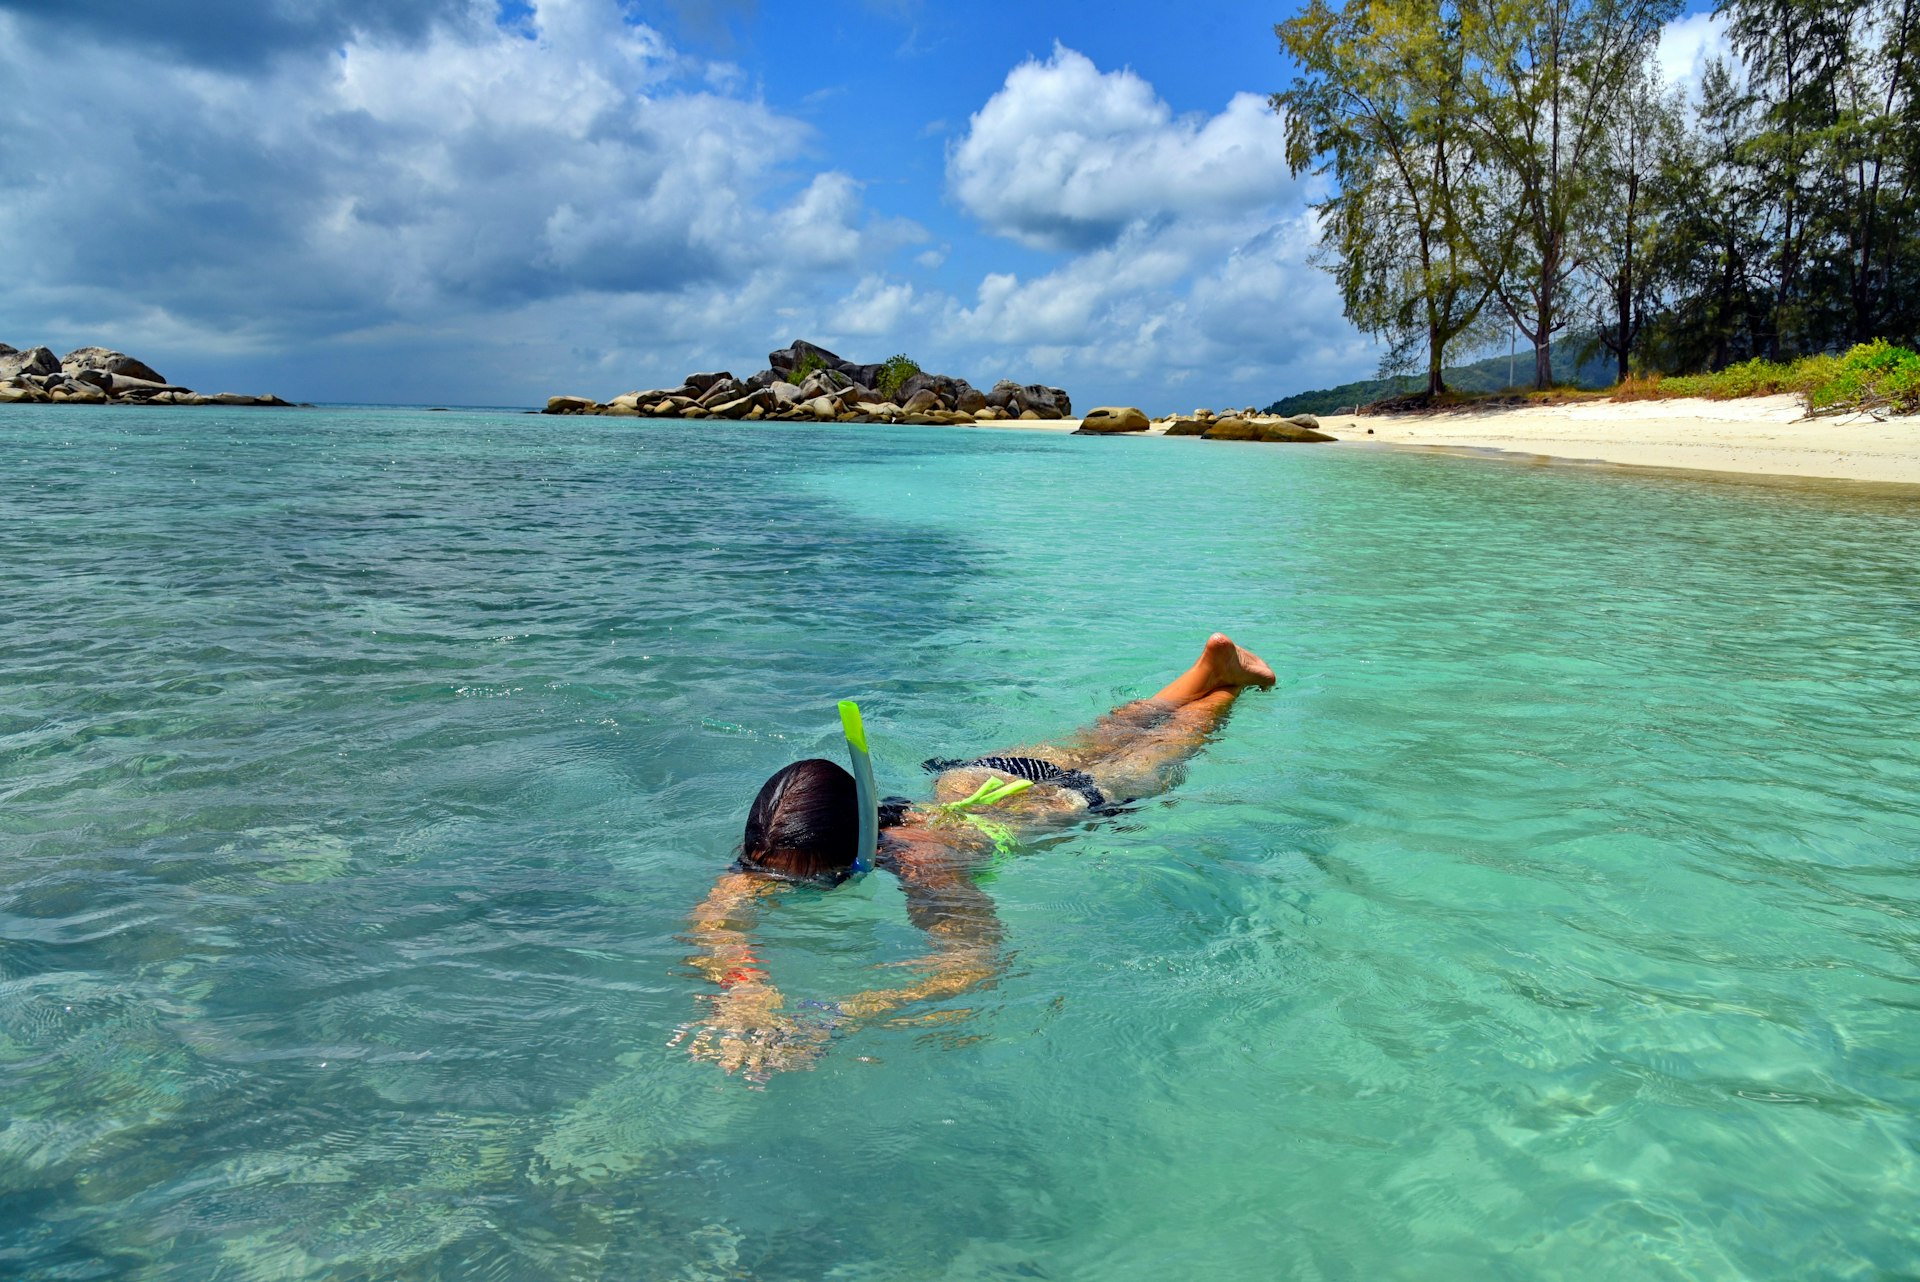 A woman snorkelling in a blue lagoon at Kecil Beach, Perhentian Islands